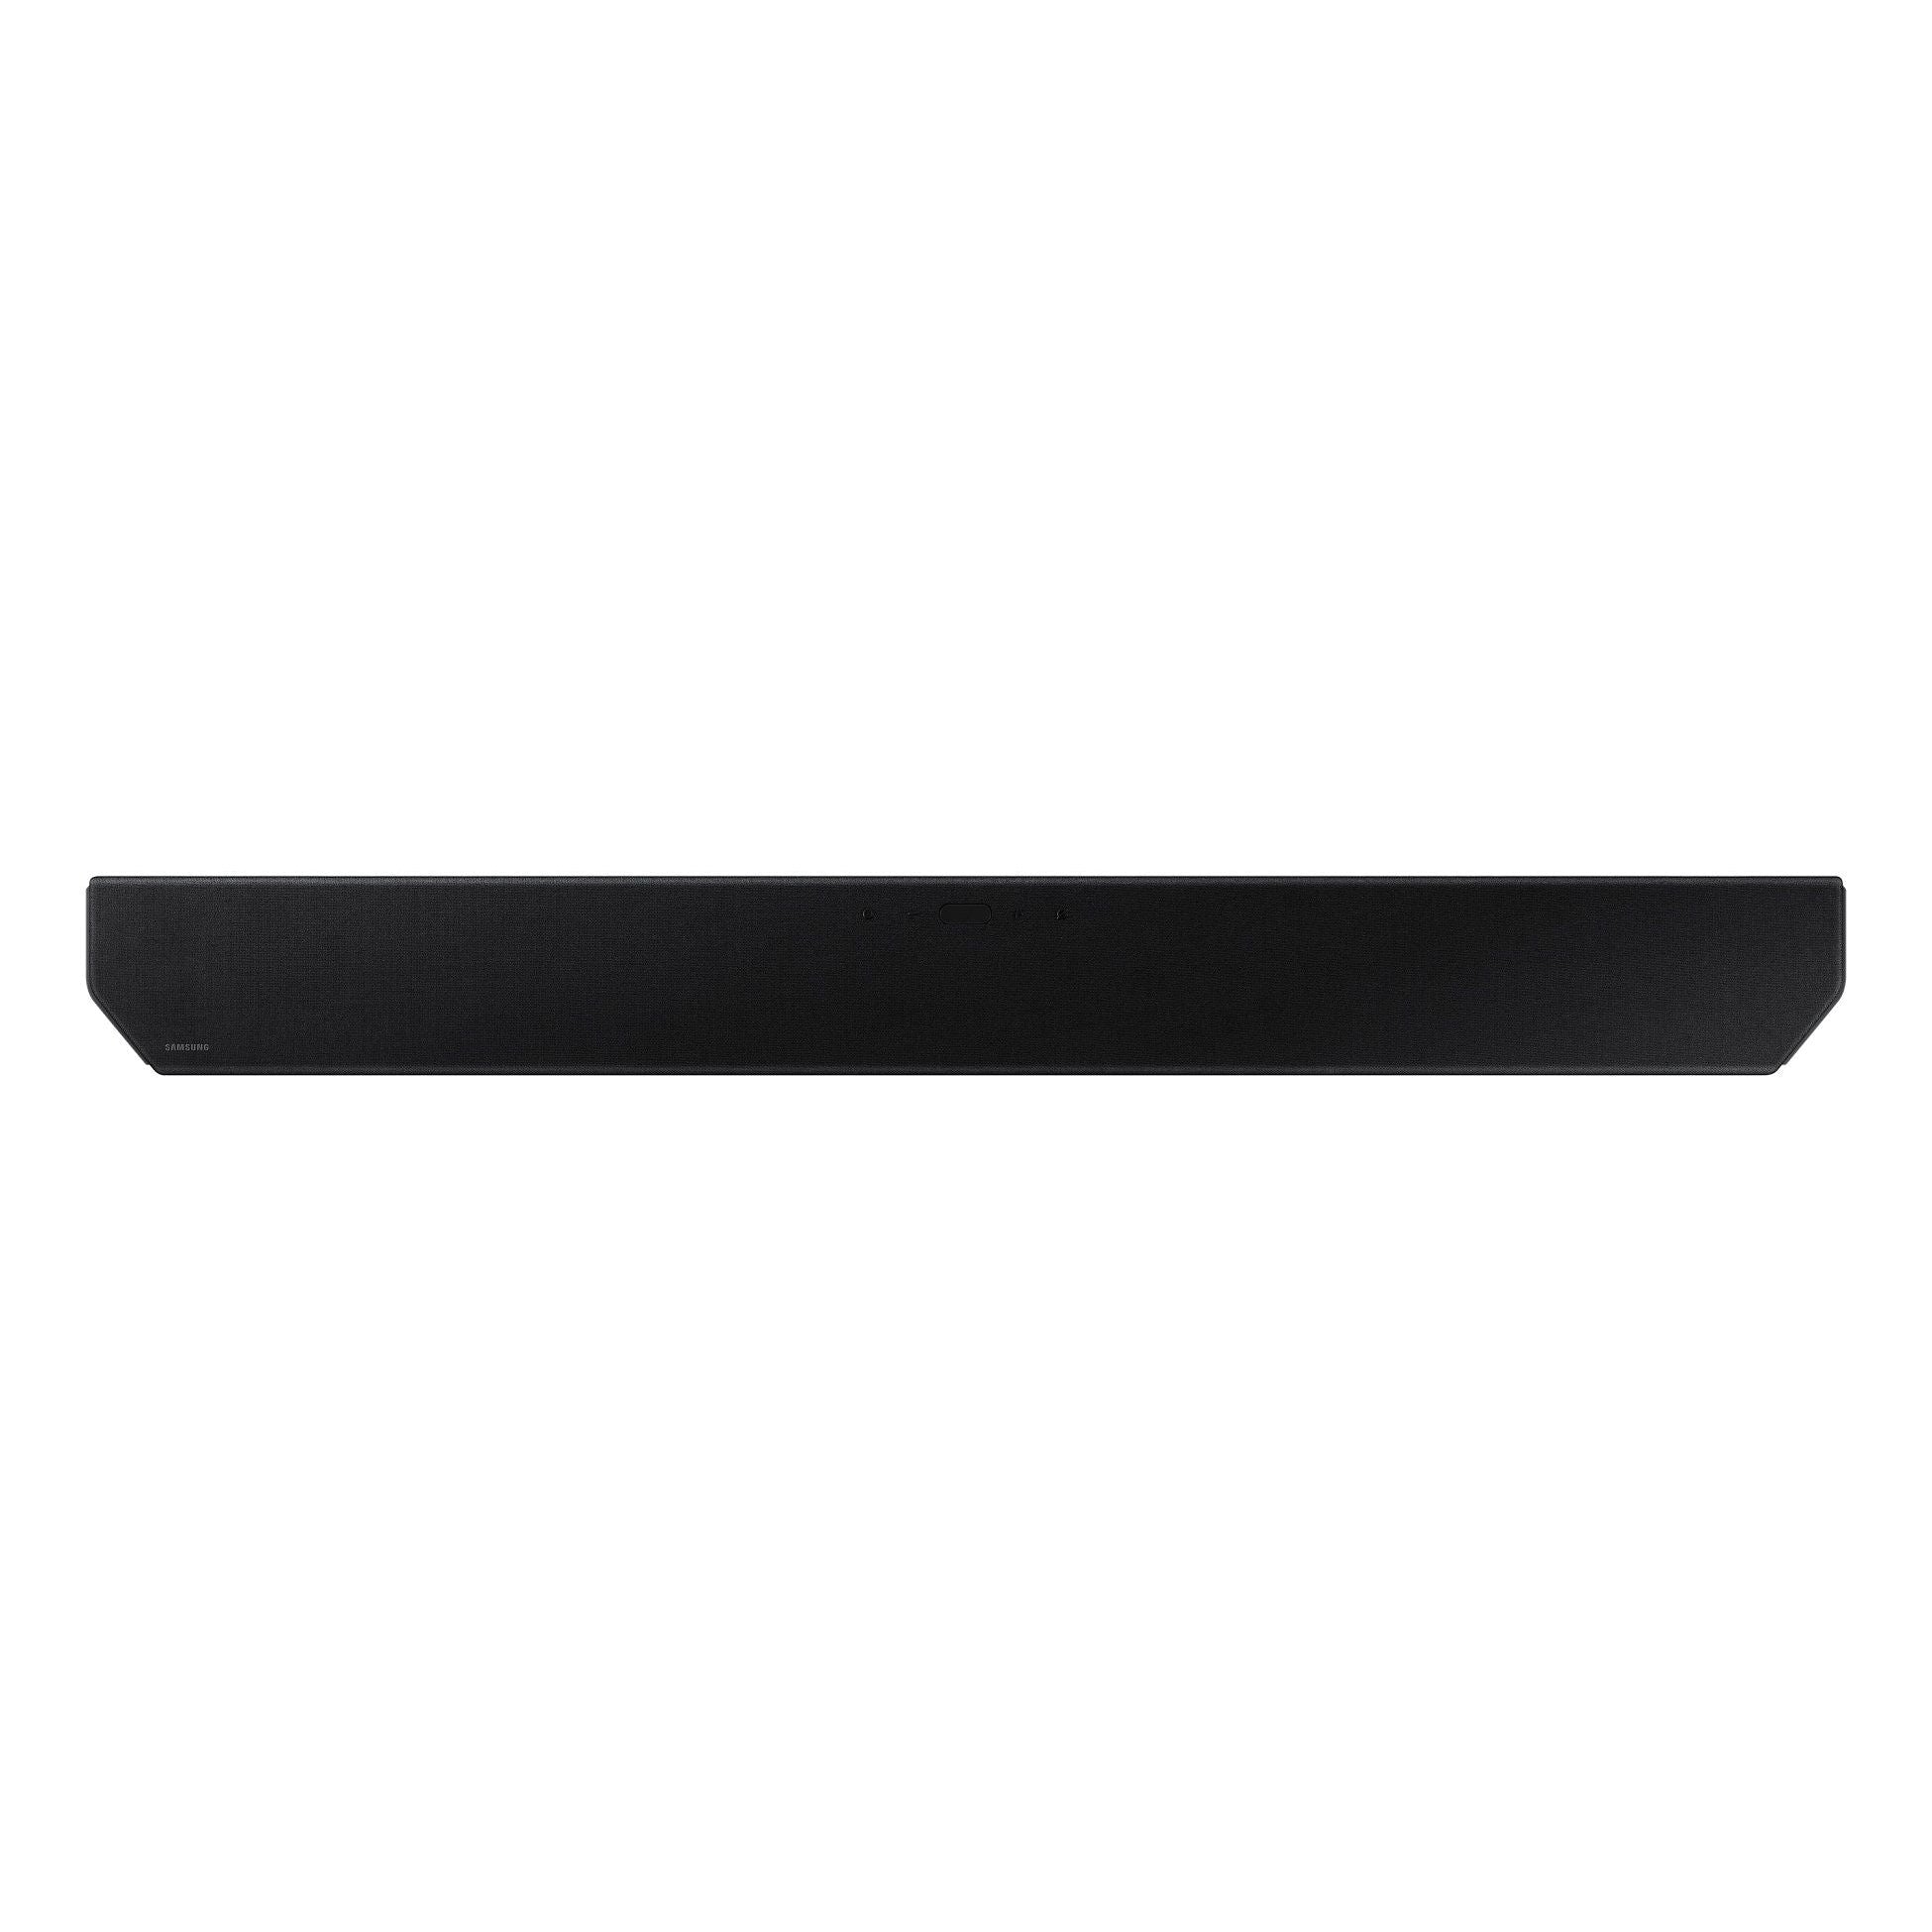 Samsung HW-Q950T 9.1.4ch Cinematic Soundbar with Dolby Atmos - Excellent Condition